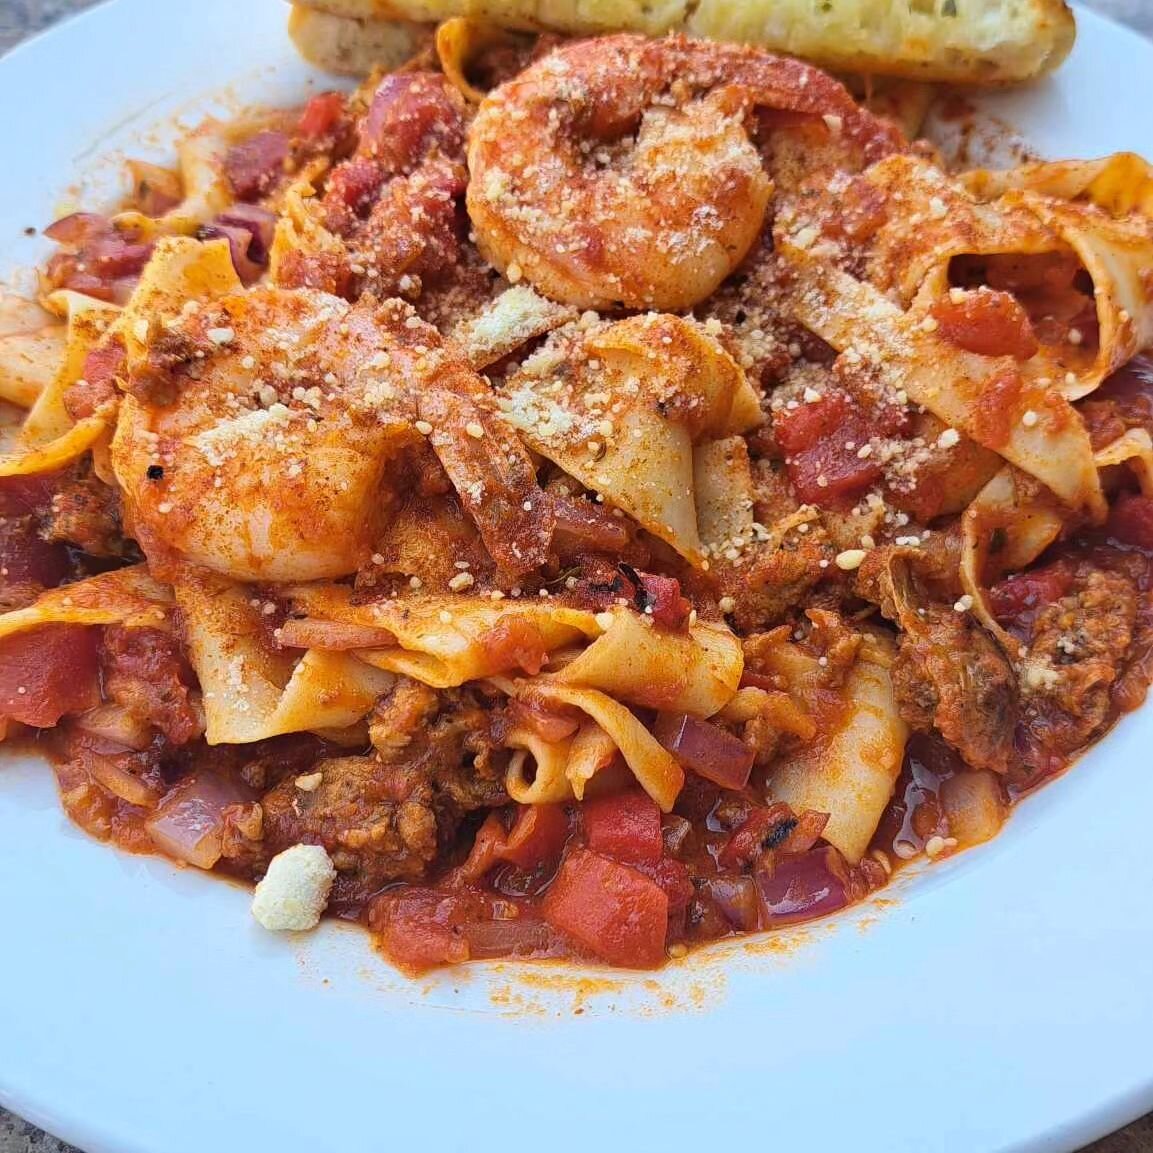 Shrimp and Cajun sausage pappardelle pasta!
@tendercuts_pc_fe made us a custom batch of Cajun sausage just for this dish!
Daryl Gray playing some sweet tunes at 9pm tonight.

See ya soon!